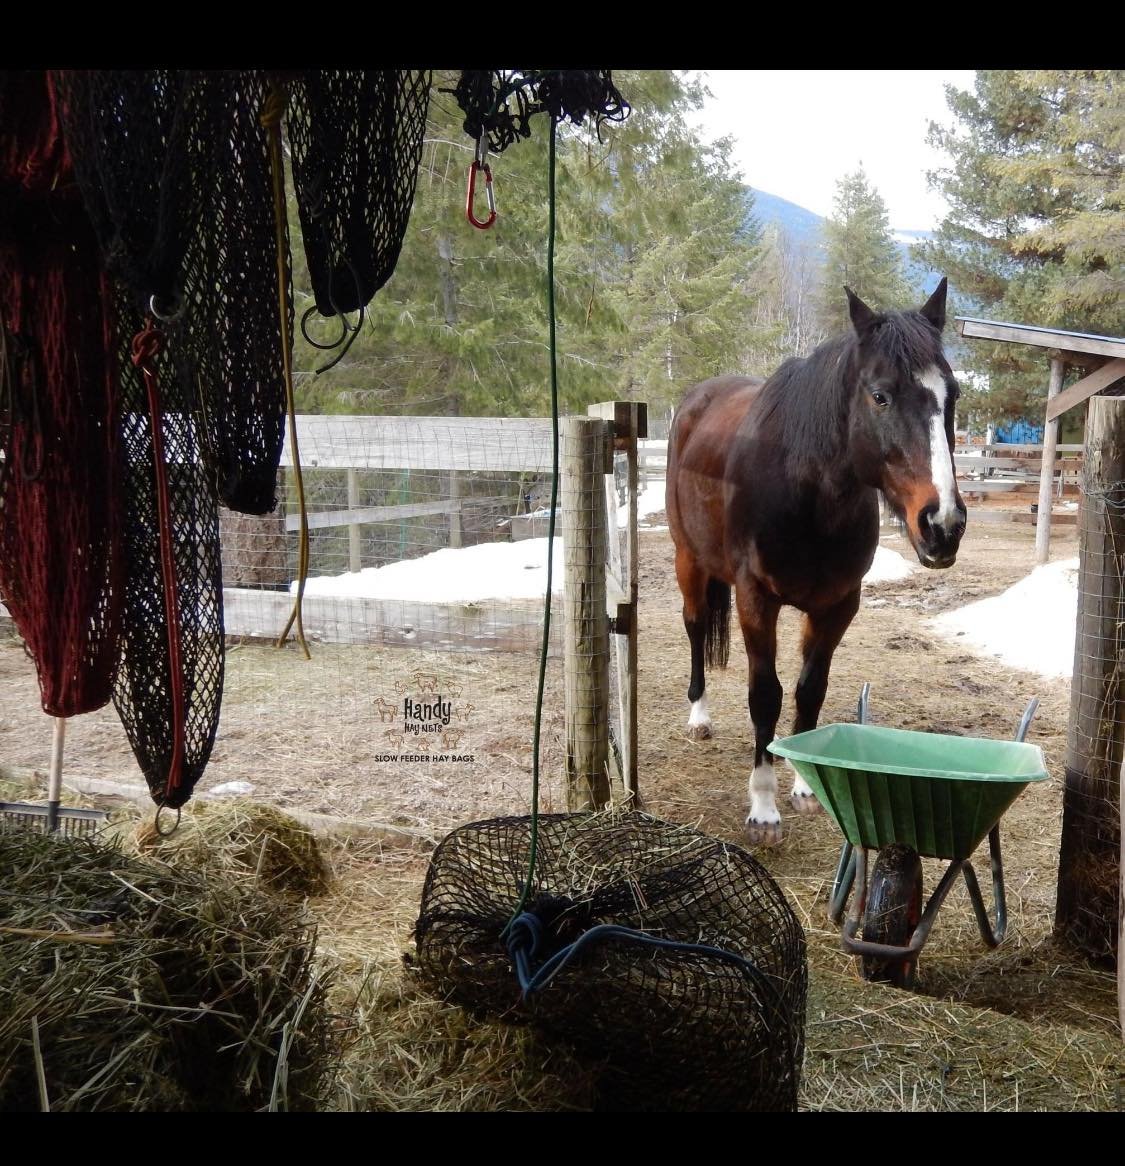 The little things in life that make me smile.
Everyday when I go to the hay shed my guy comes to up and keeps me company. He never misses a day! Once the wheelbarrow is moved, he just comes in and calmly eats and picks at all the hay bags. These are 